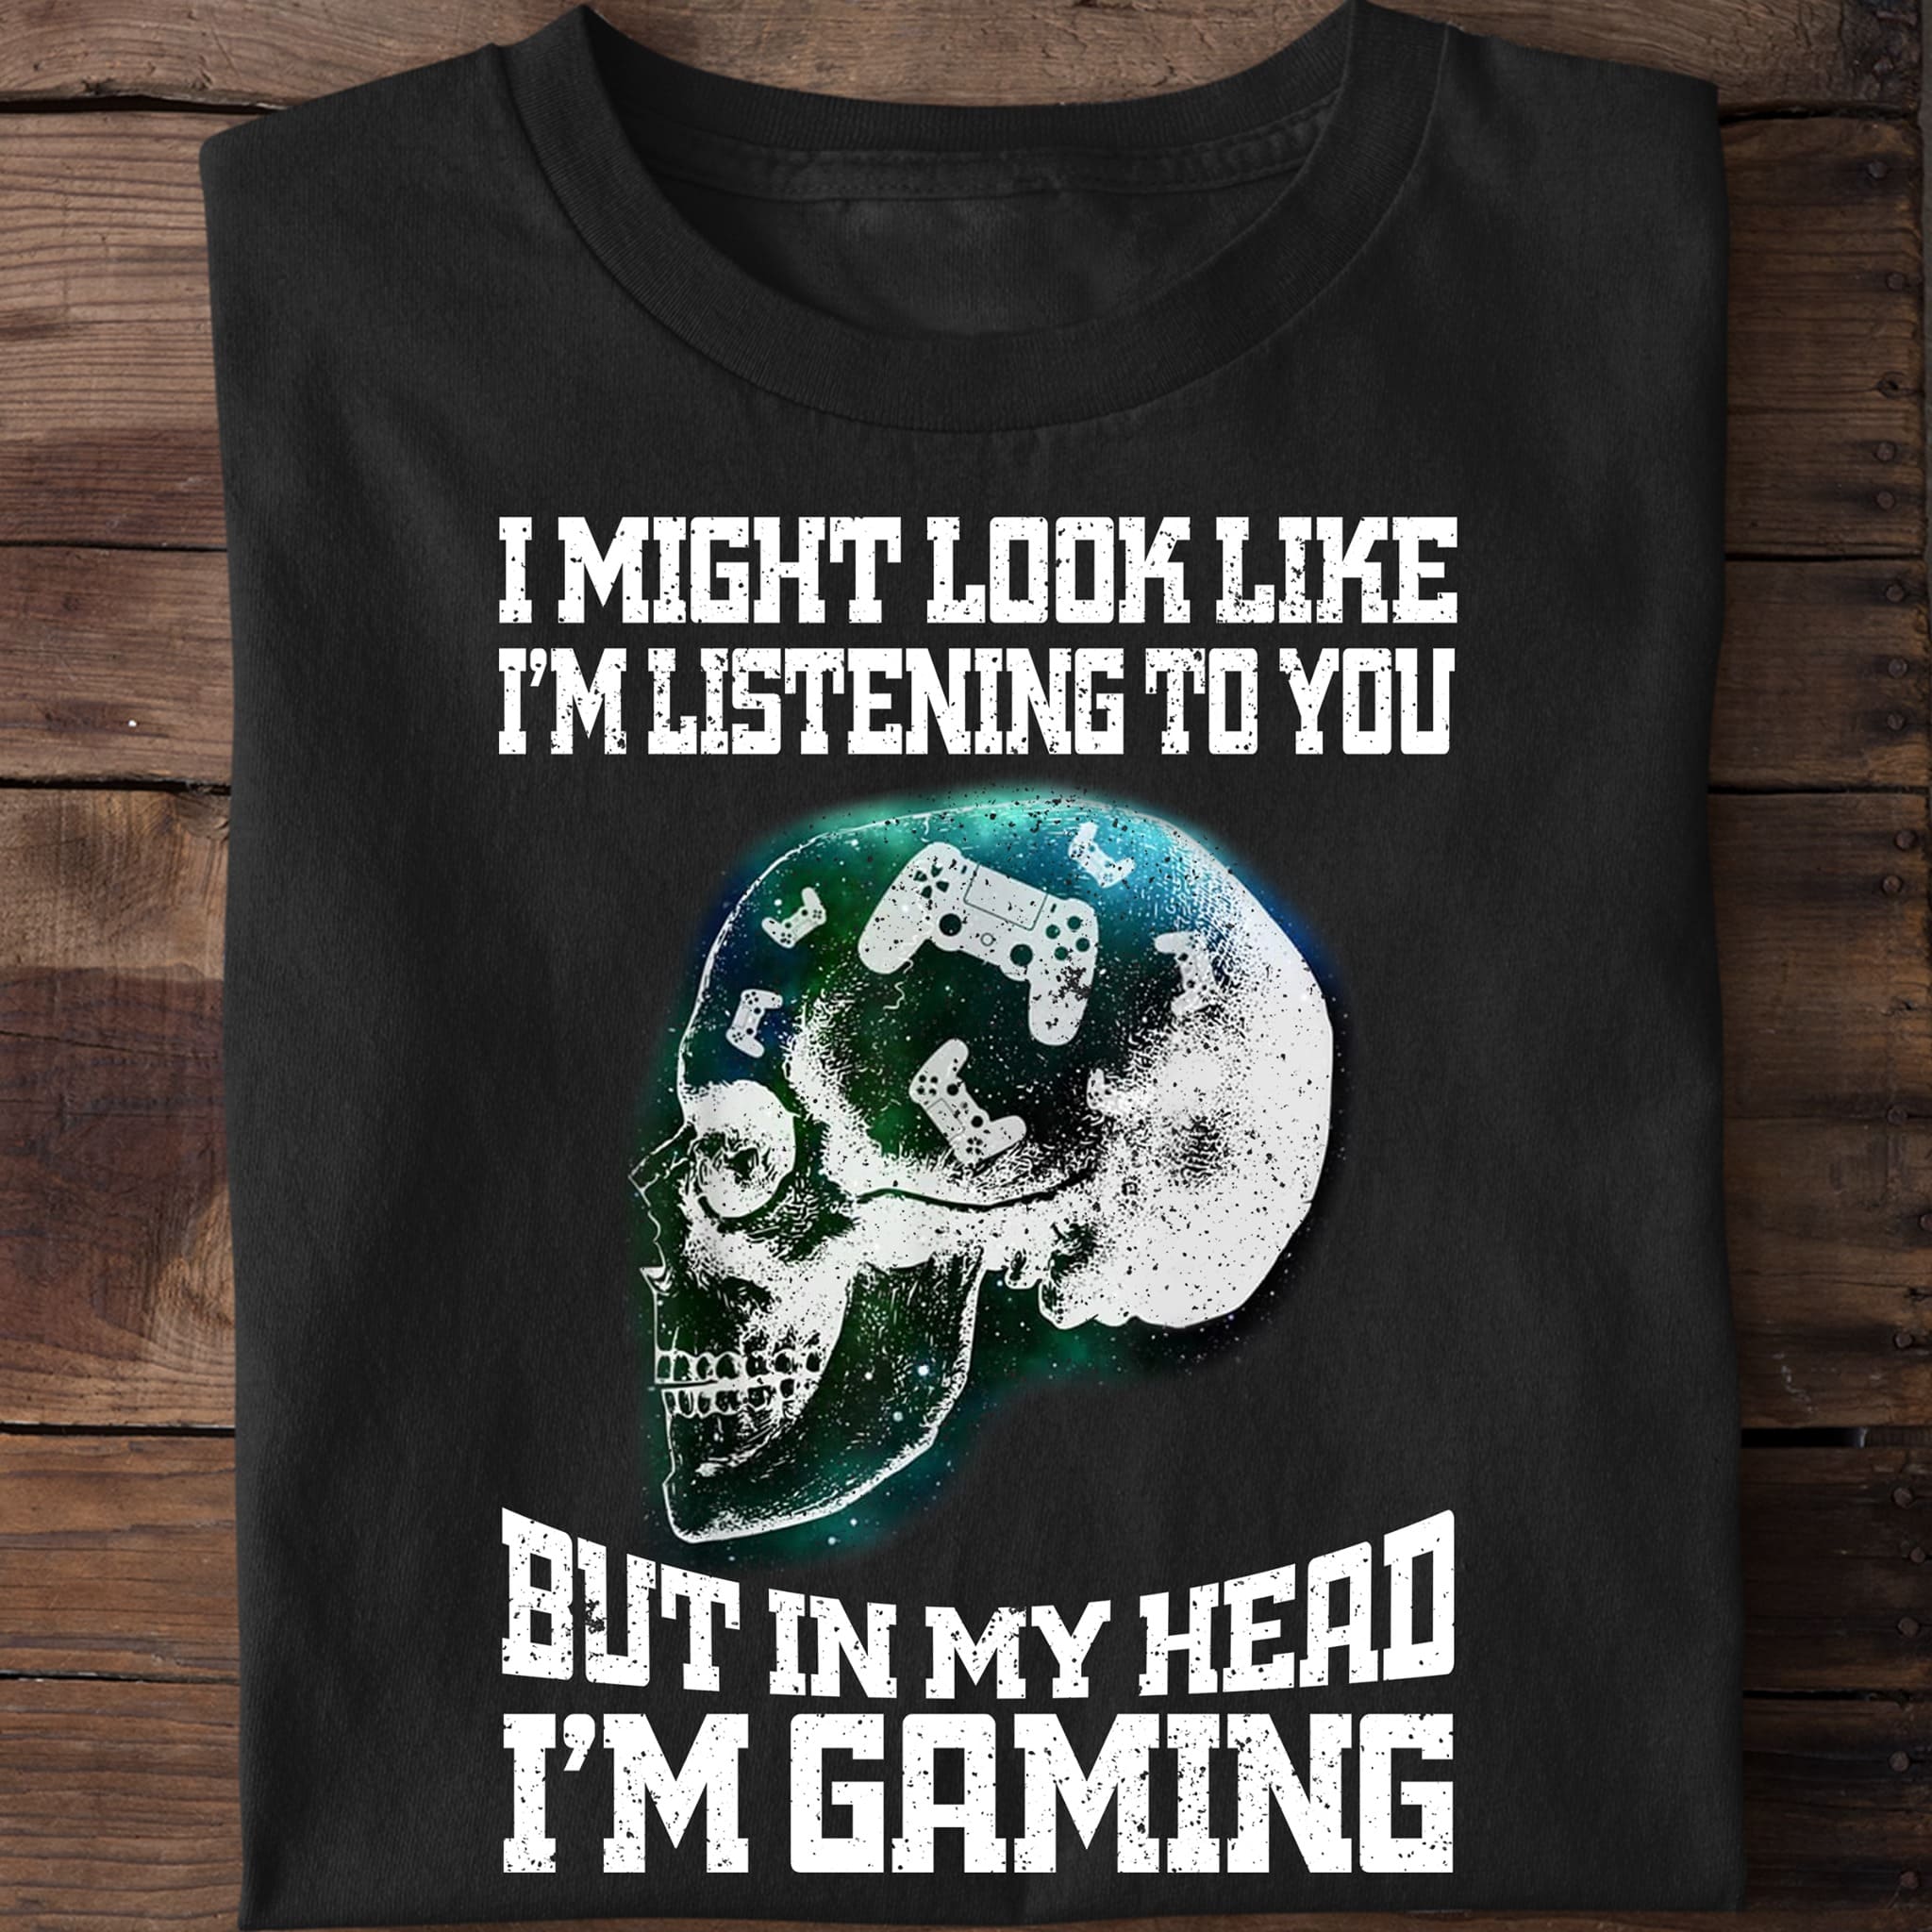 I might look like I'm listening to you but in my head I'm gaming - Skull gaming mind, T-shirt for gamers